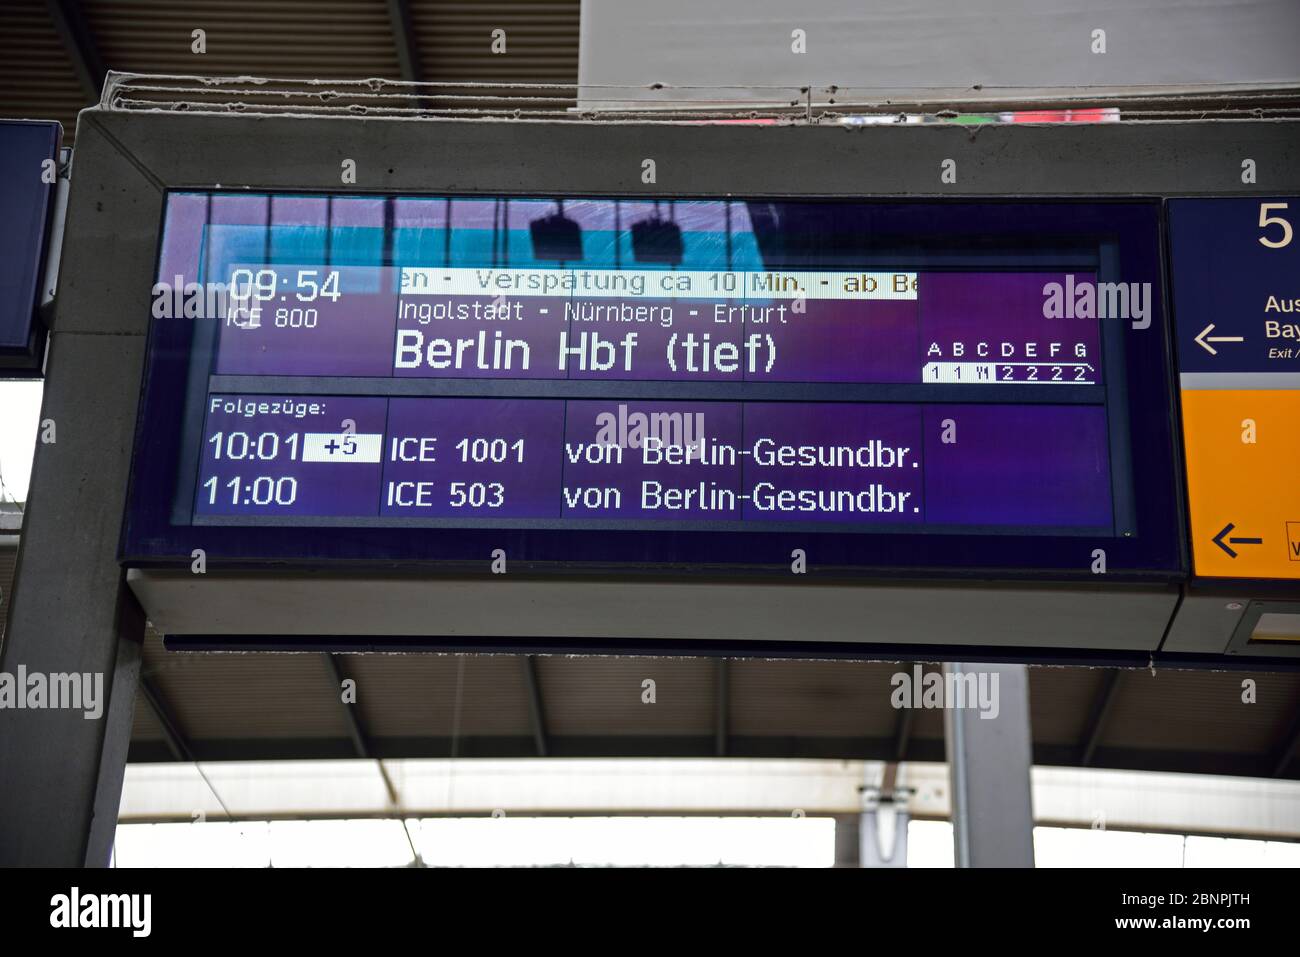 Europe, Germany, Bayer, Munich, central station, train arrival hall, local and long-distance traffic, billboard, Stock Photo